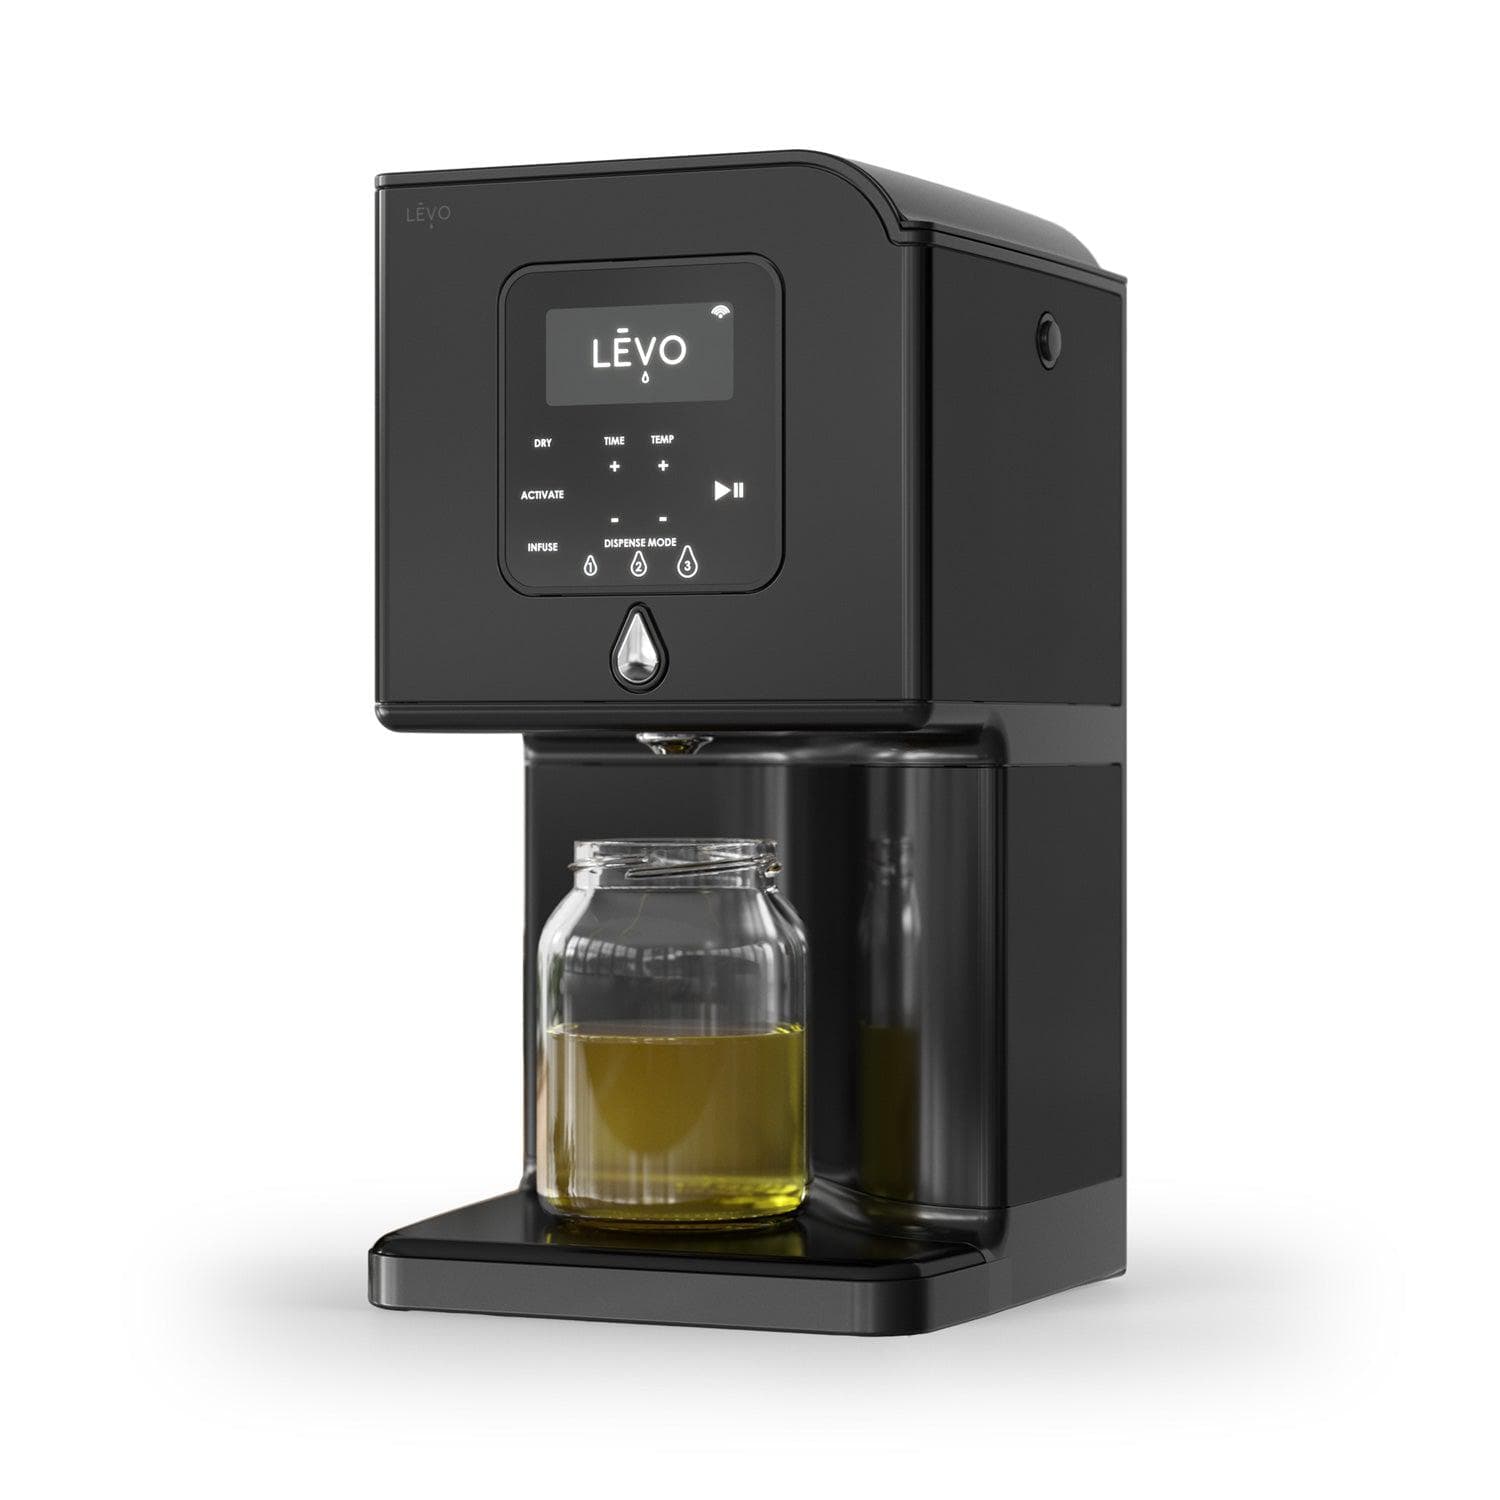 LĒVO Lux oil and botanical infuser. Make your own infused oils for edilble treats.